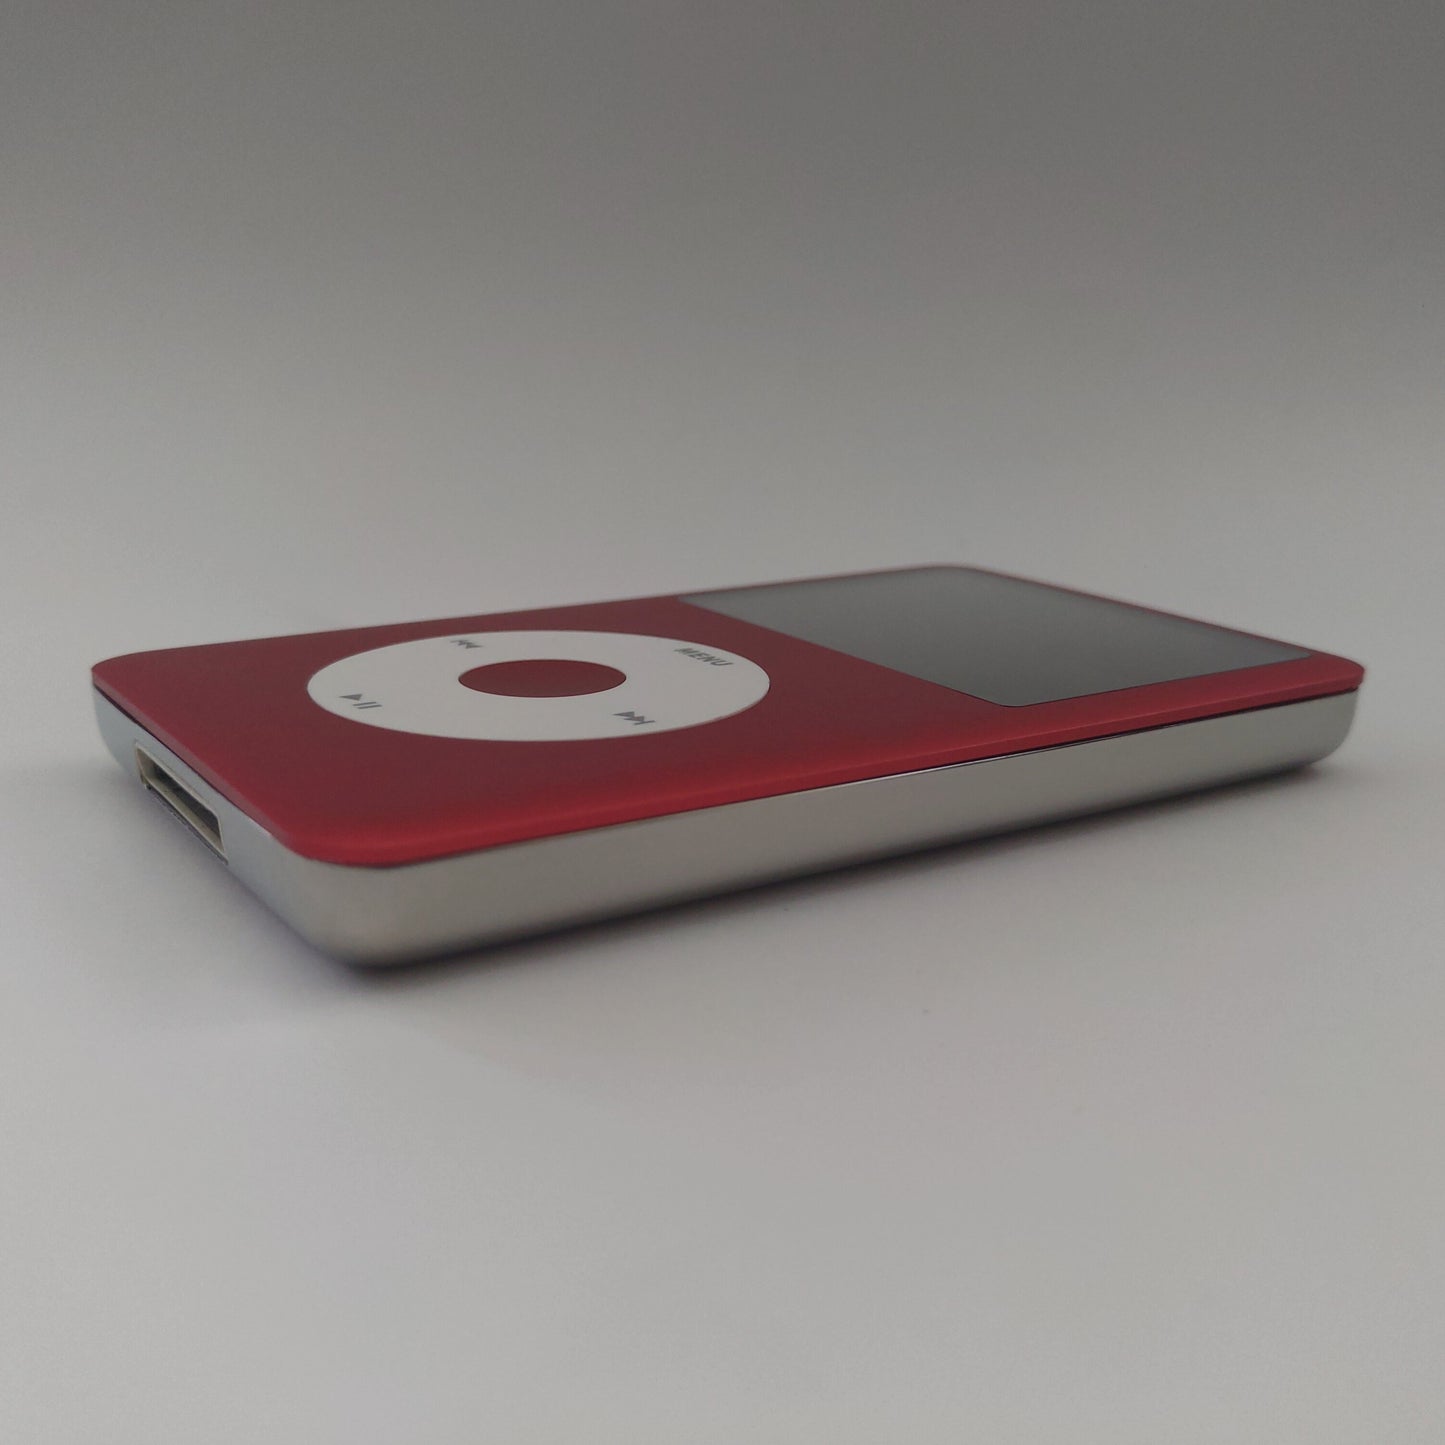 Red iPod classic with White Click Wheel side view